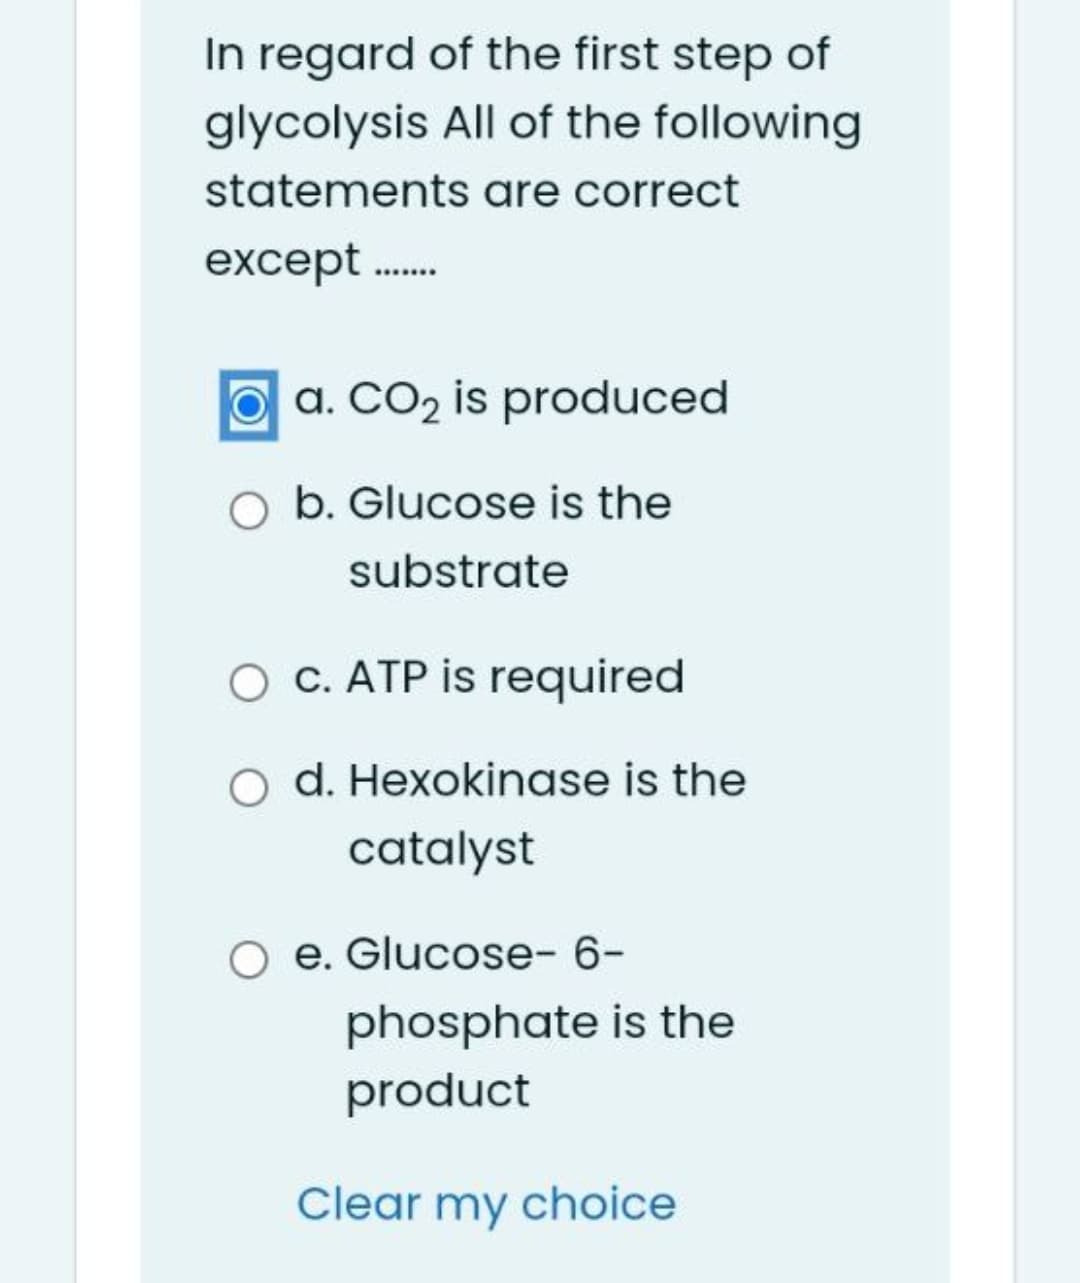 In regard of the first step of
glycolysis All of the following
statements are correct
except .
O a. CO2 is produced
O b. Glucose is the
substrate
O c. ATP is required
O d. Hexokinase is the
catalyst
O e. Glucose- 6-
phosphate is the
product
Clear my choice
